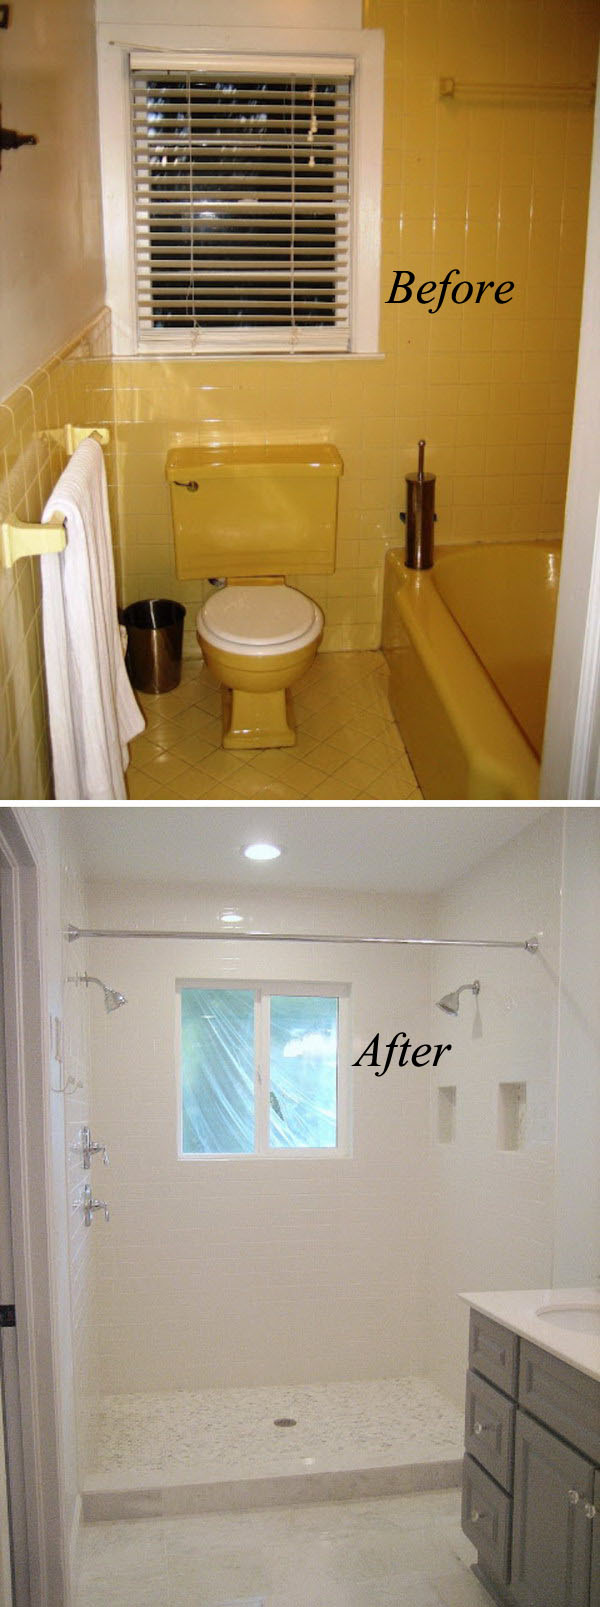 39-40-bathroom-remodel-before-and-after